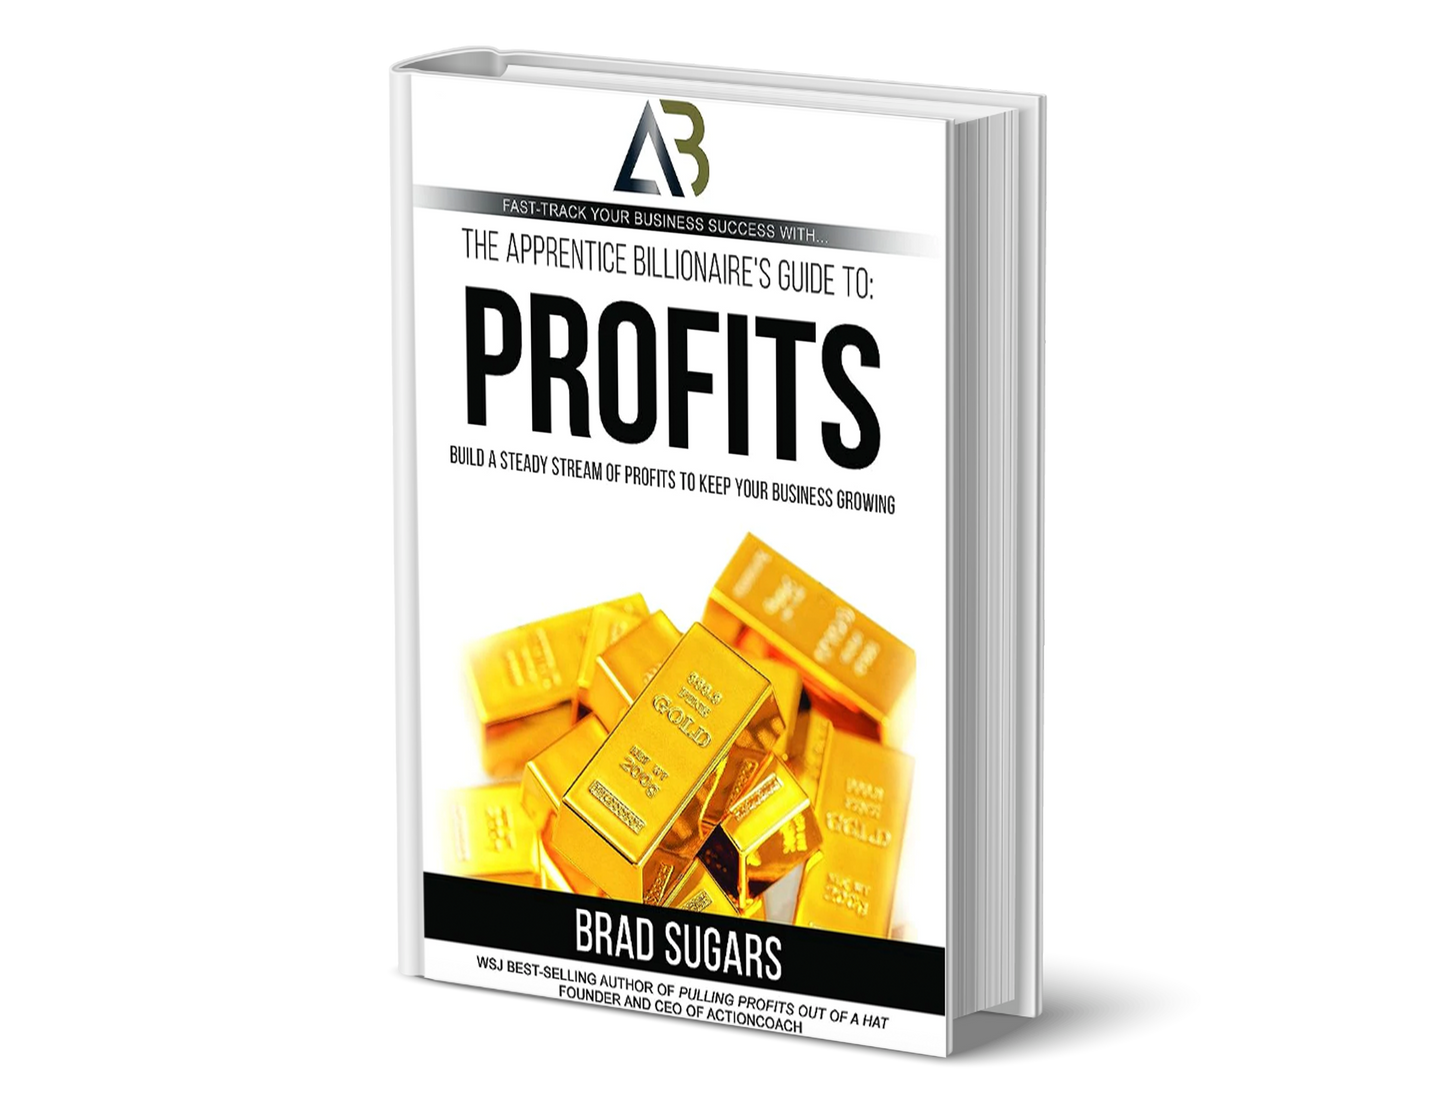 Apprentice Billionaire's Guide to Profits: Build a Steady Stream of Profits to Keep Your Business Growing